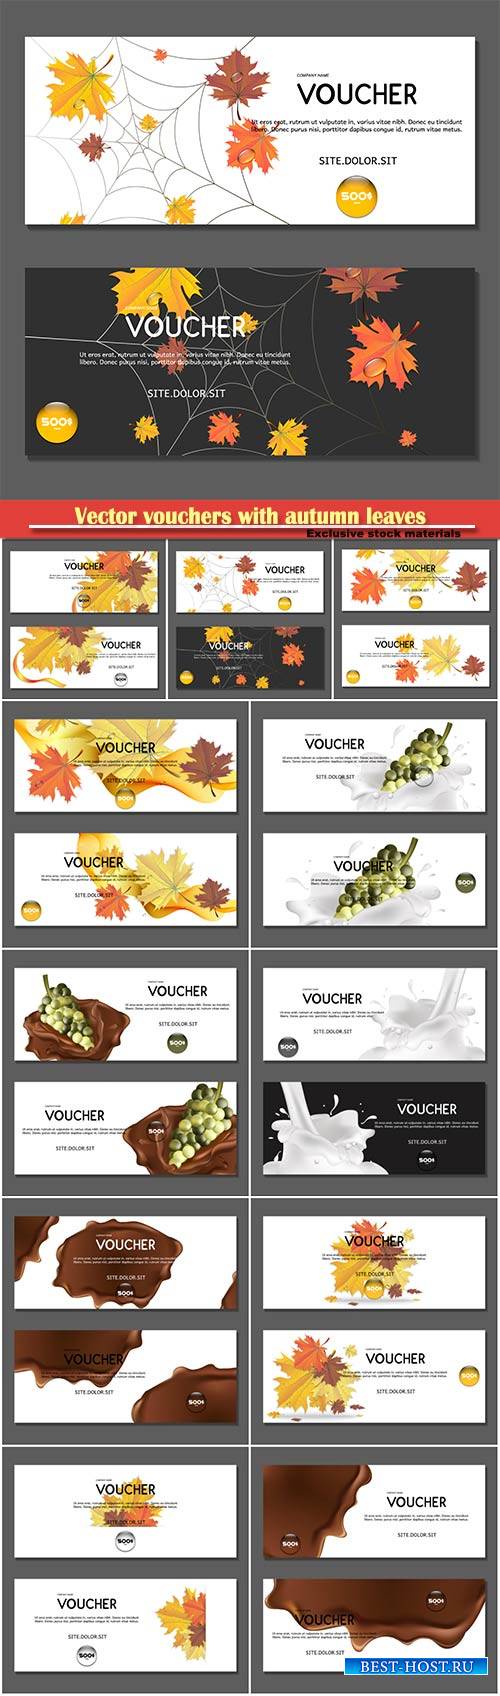 Vector vouchers with autumn leaves and grapes